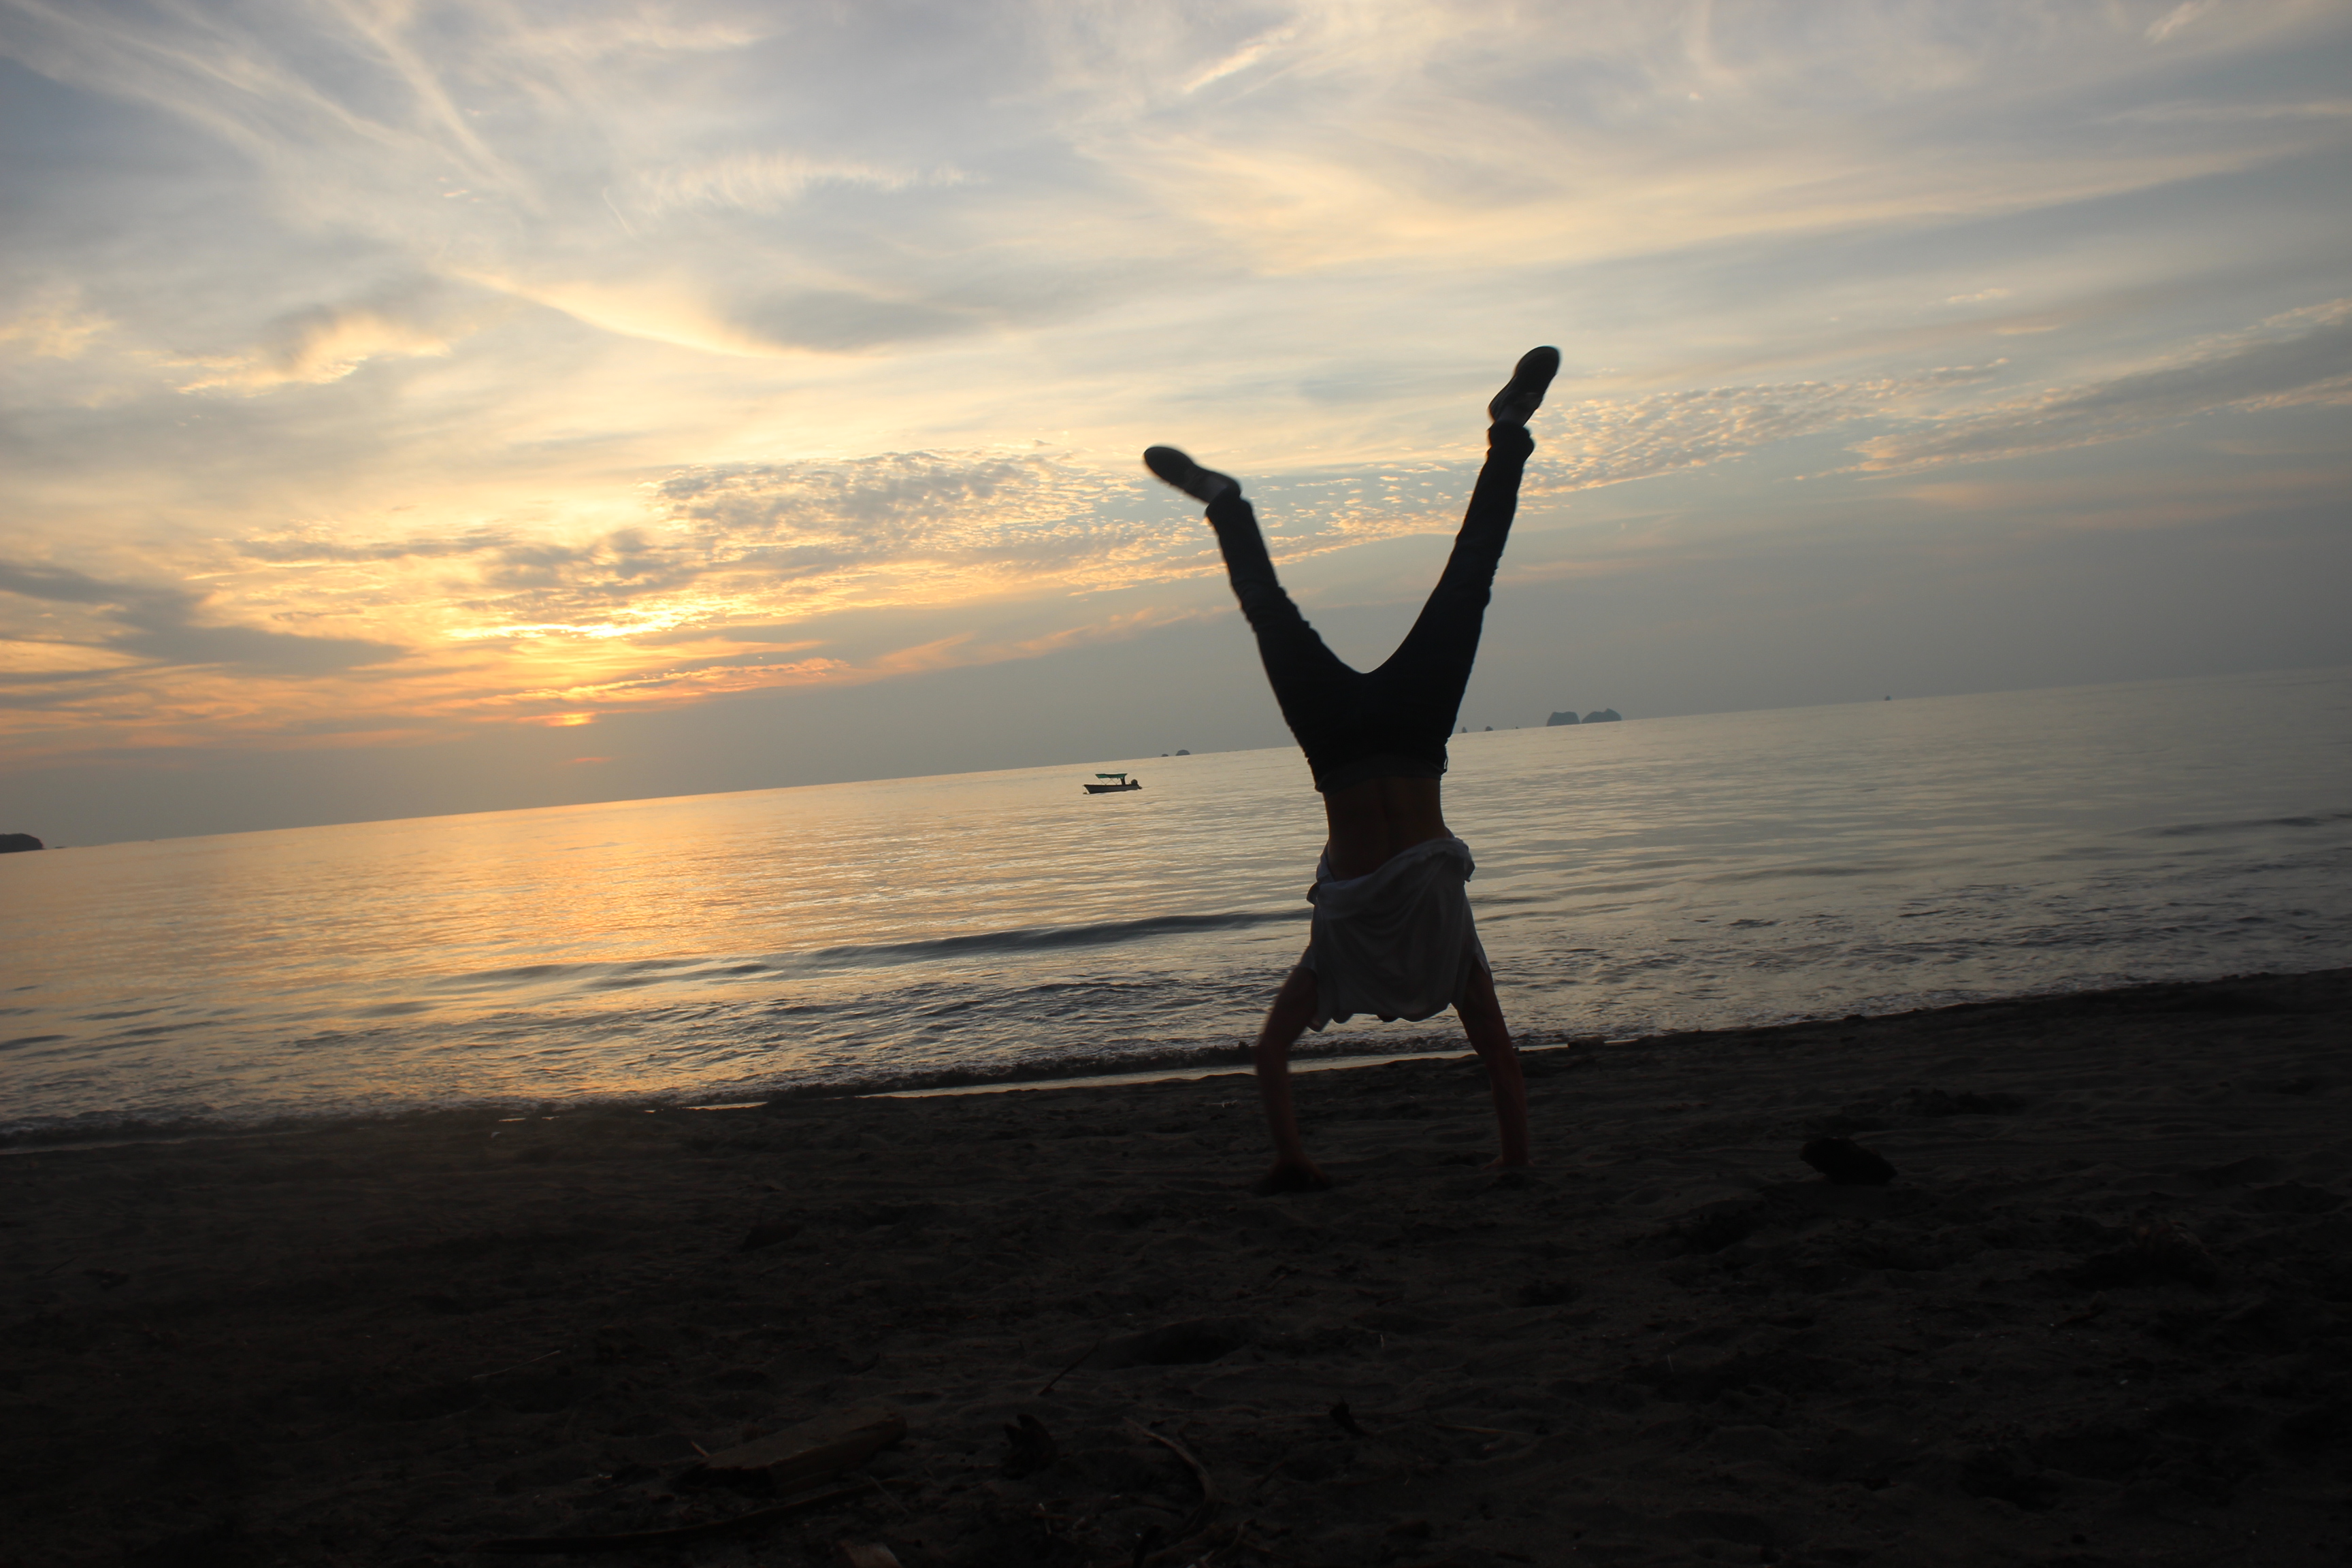 Student does a cartwheel on the beaches of Costa Rica at sunset.